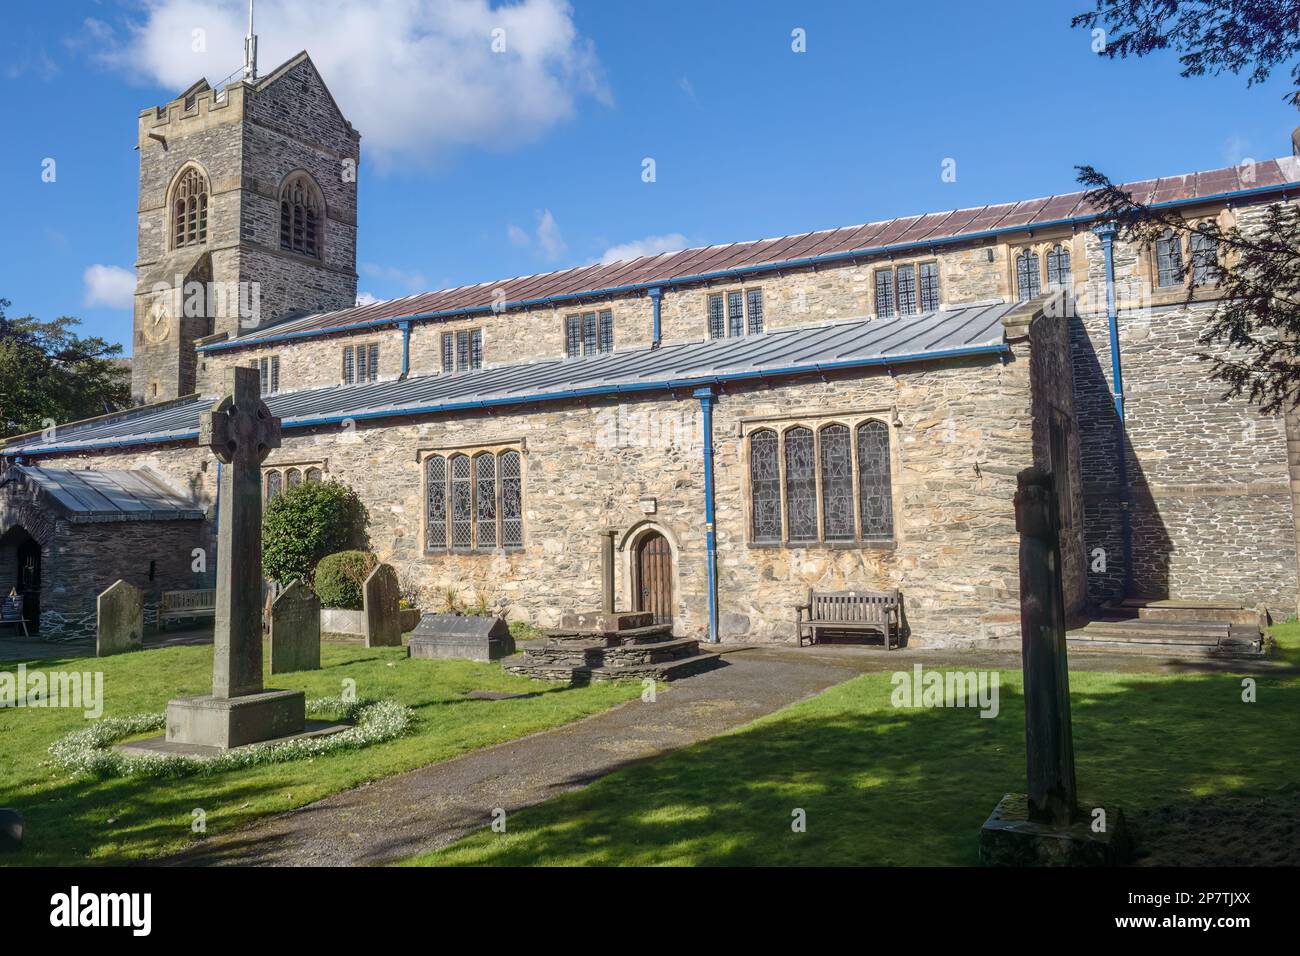 07.03.2023 Windermere, Cumbria, UK.St Martin's Church stands in the centre of the town of Bowness-on-Windermere, Cumbria, England. It is an active Ang Stock Photo